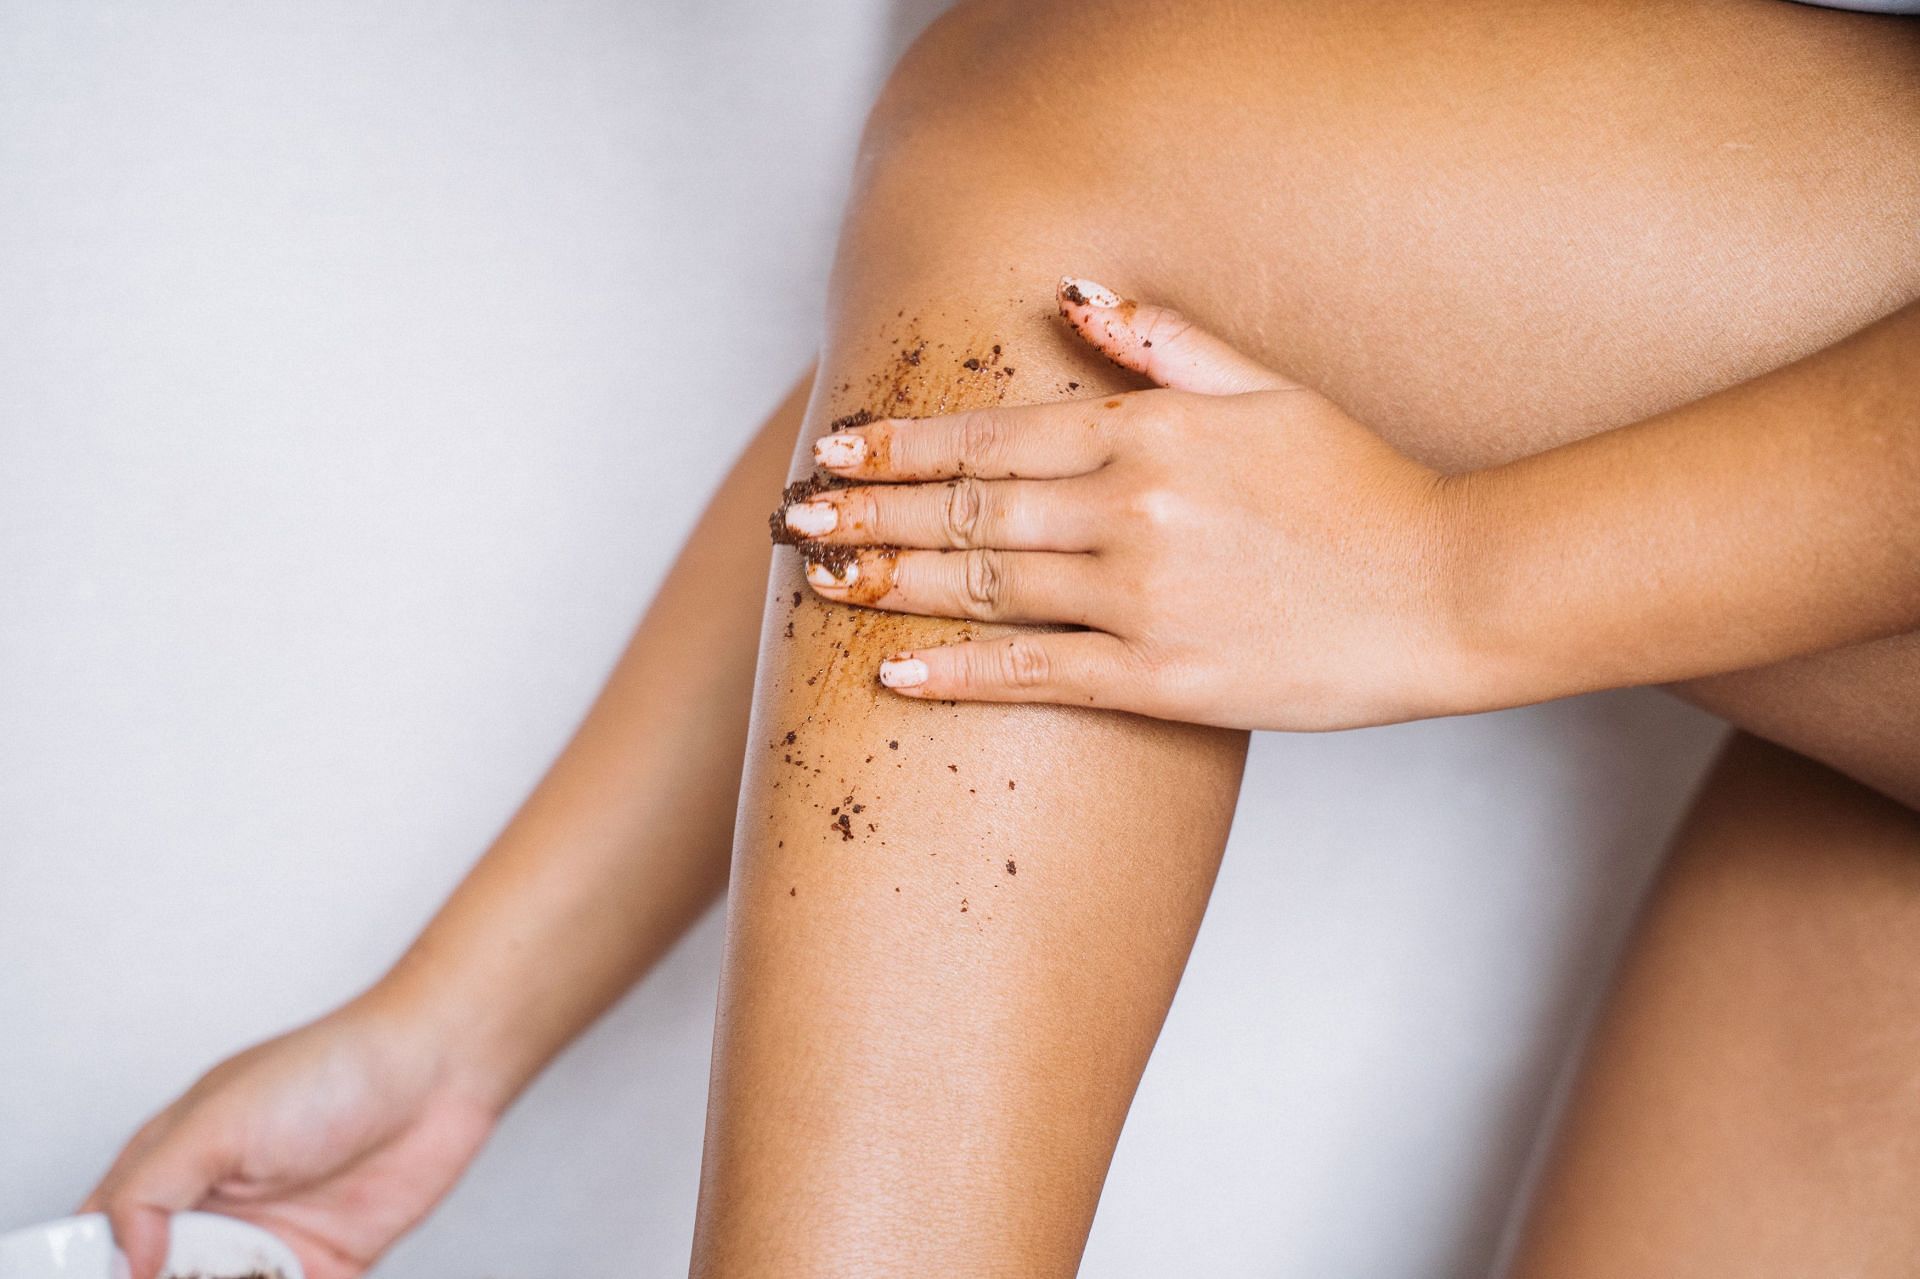 Causes inflammation and redness on skin. (Image via Pexels/Anna Tarazevich)